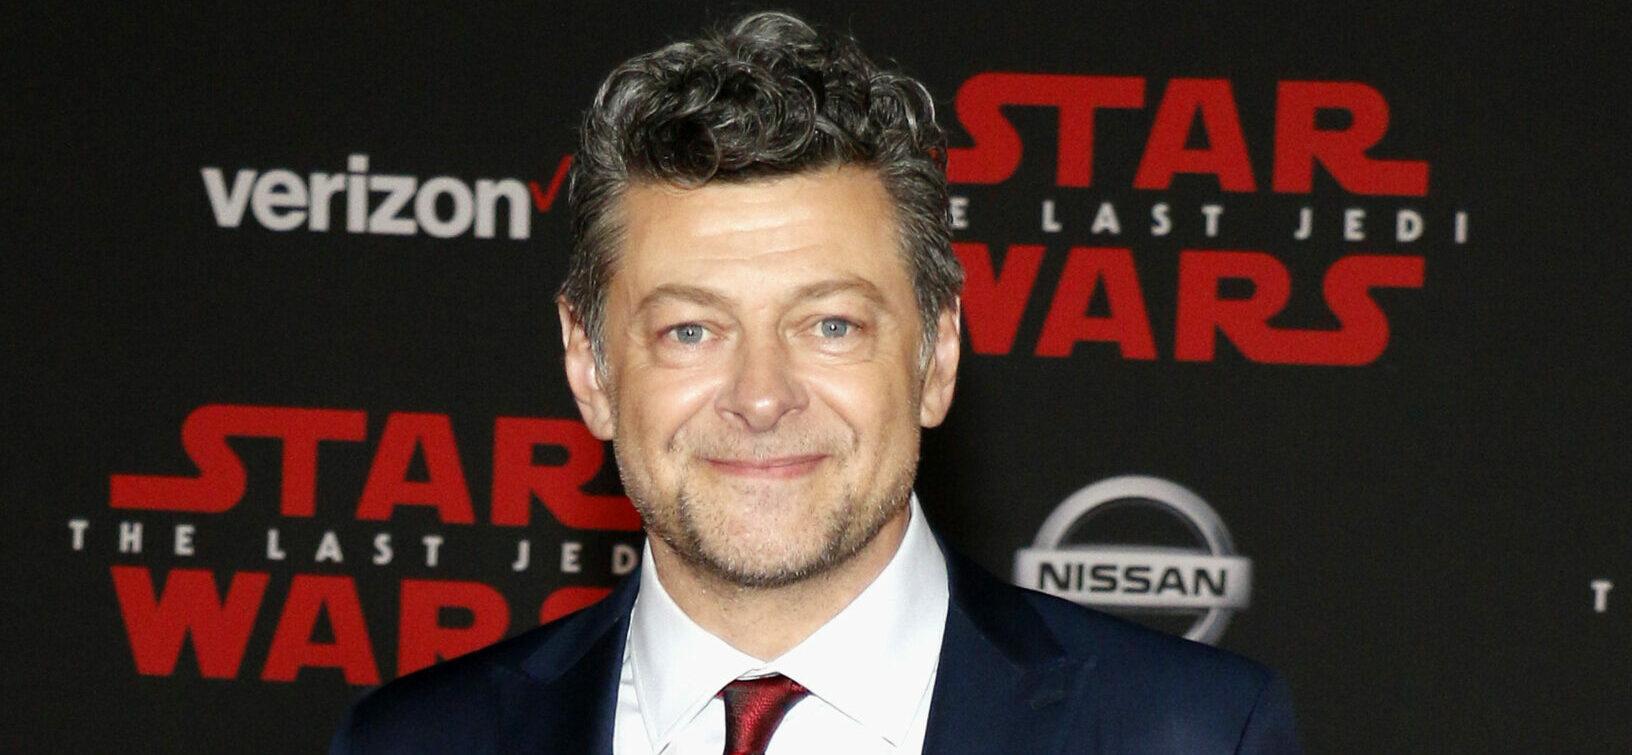 Andy Serkis at the World premiere of 'Star Wars: The Last Jedi'